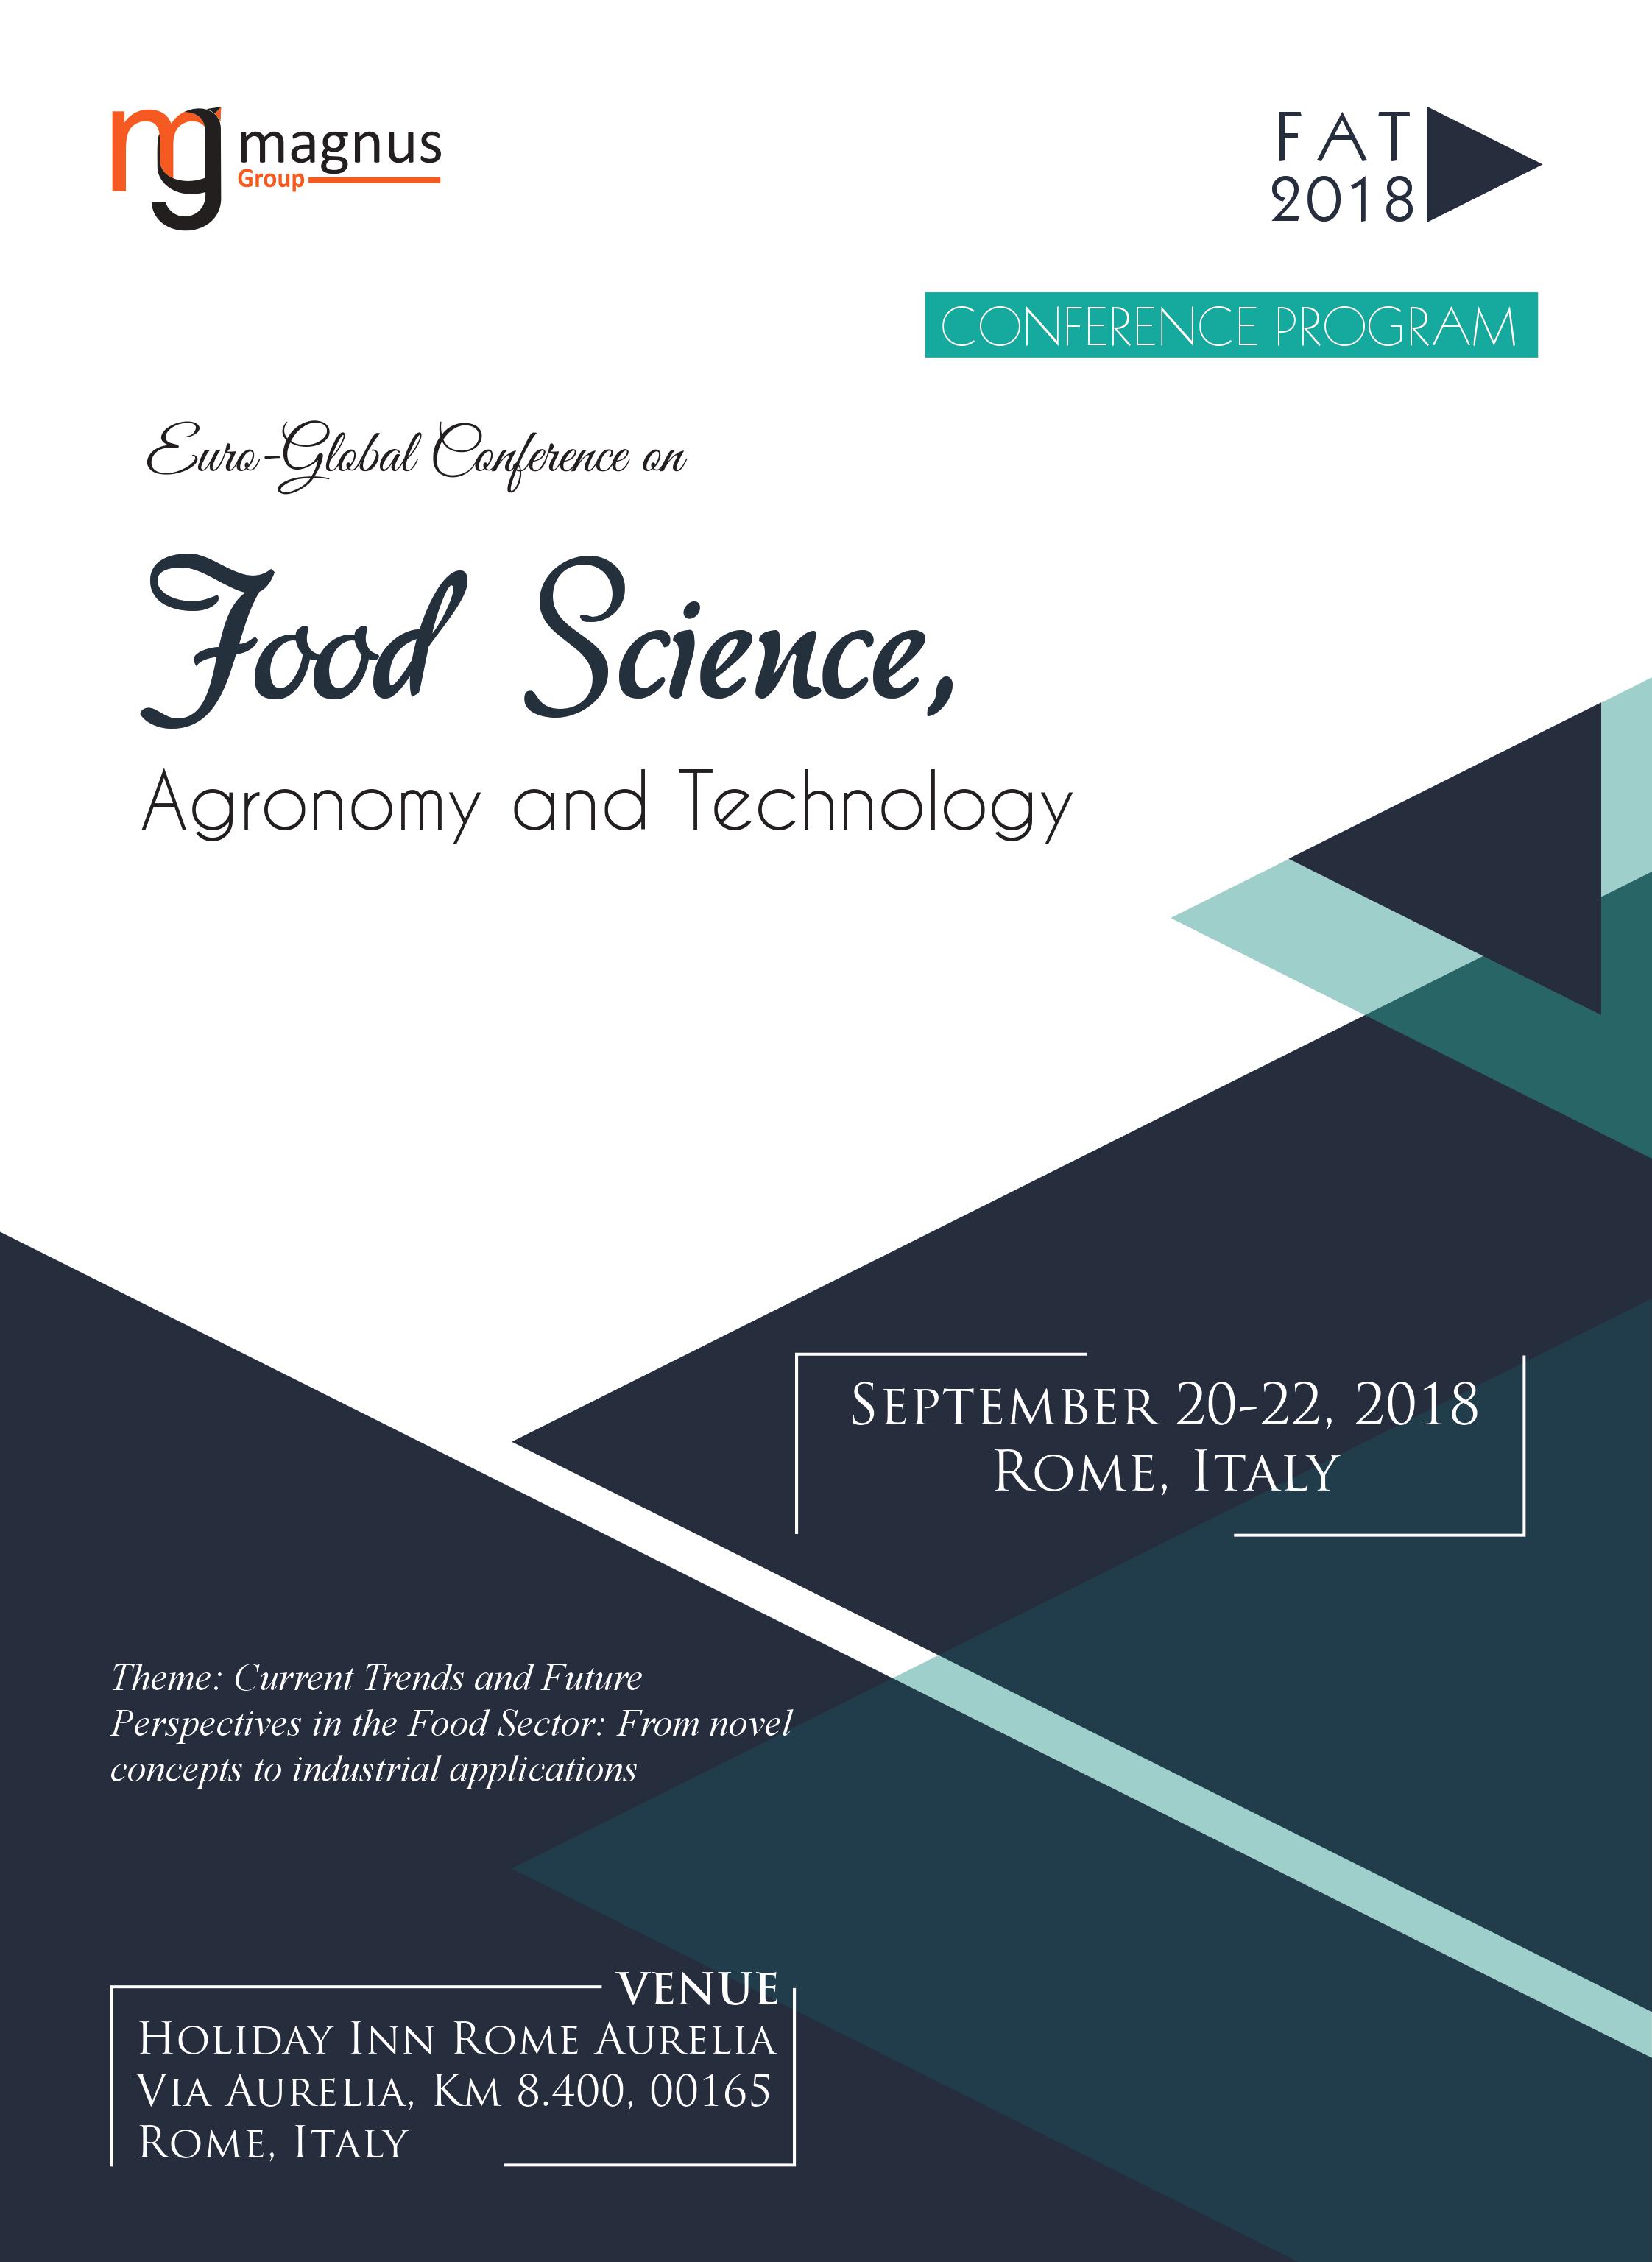 Euro-Global Conference on Food Science, Agronomy and Technology Program